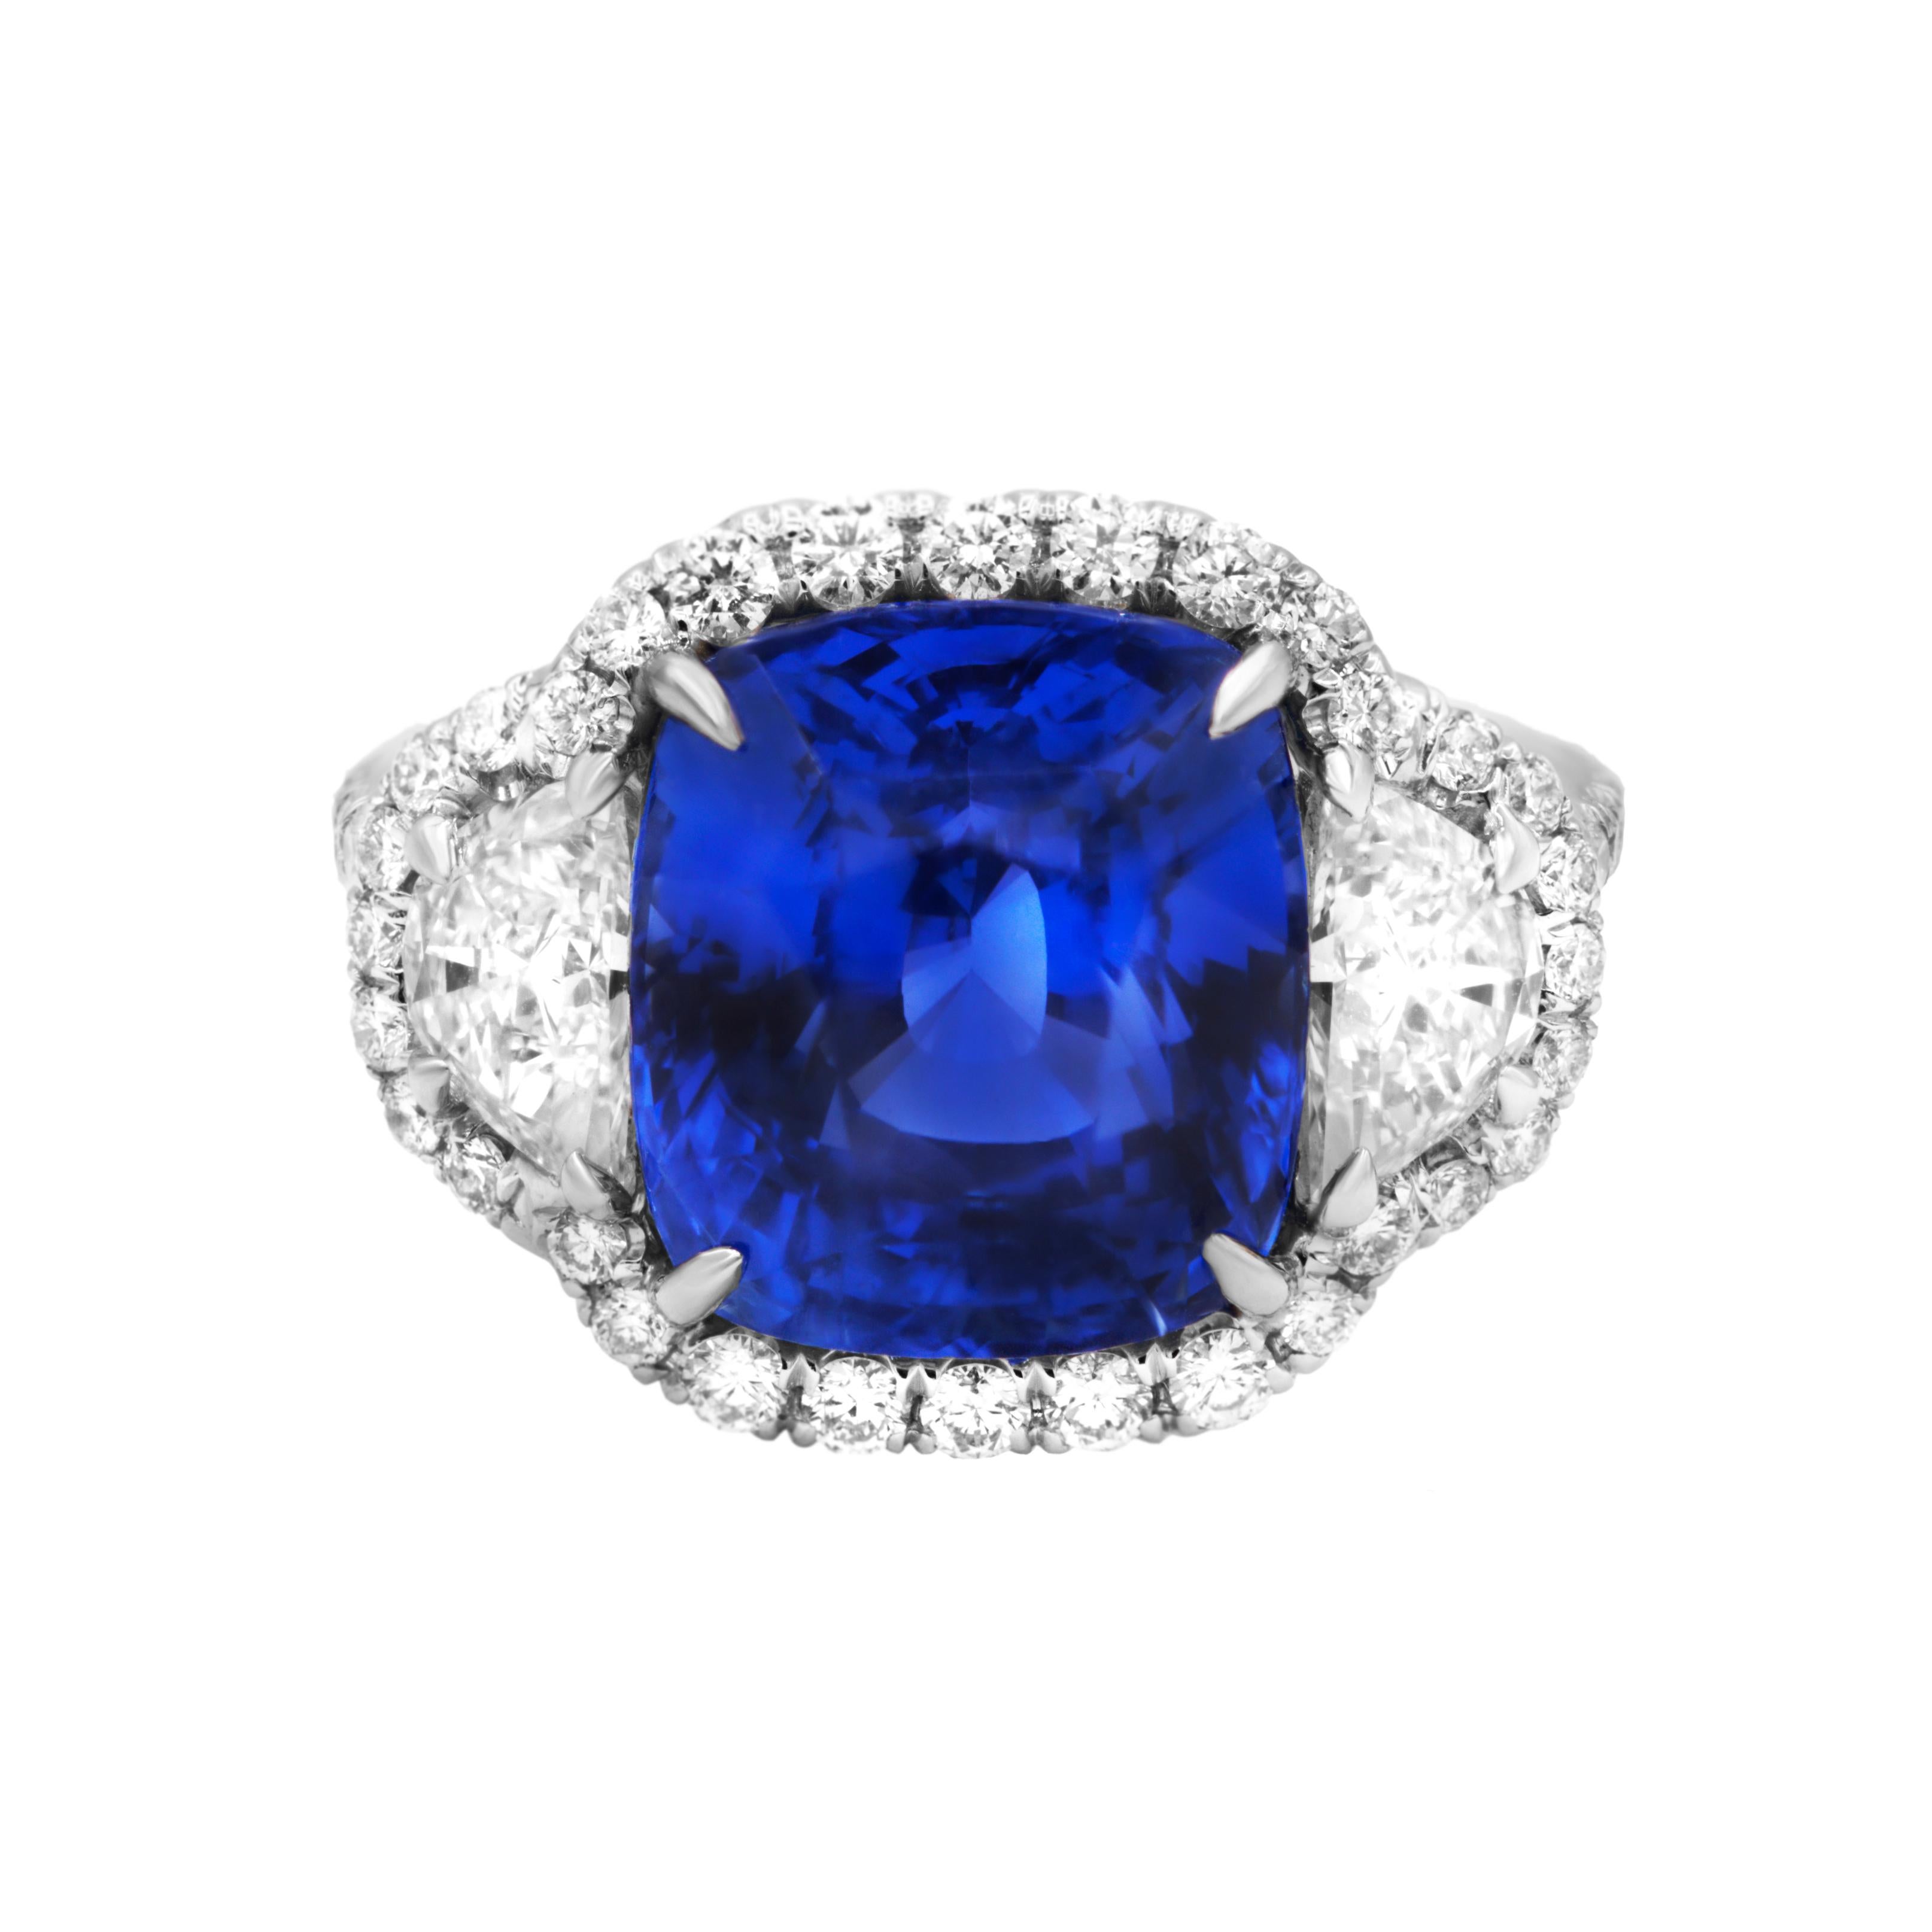 Platinum sapphire and diamond ring featuring a 9.11 ct GRS certified unheated cushion cut ceylon sapphire with 2 half moon shaped diamonds and halo totaling 1.40 cts tw.
Diana M. is a leading supplier of top-quality fine jewelry for over 35